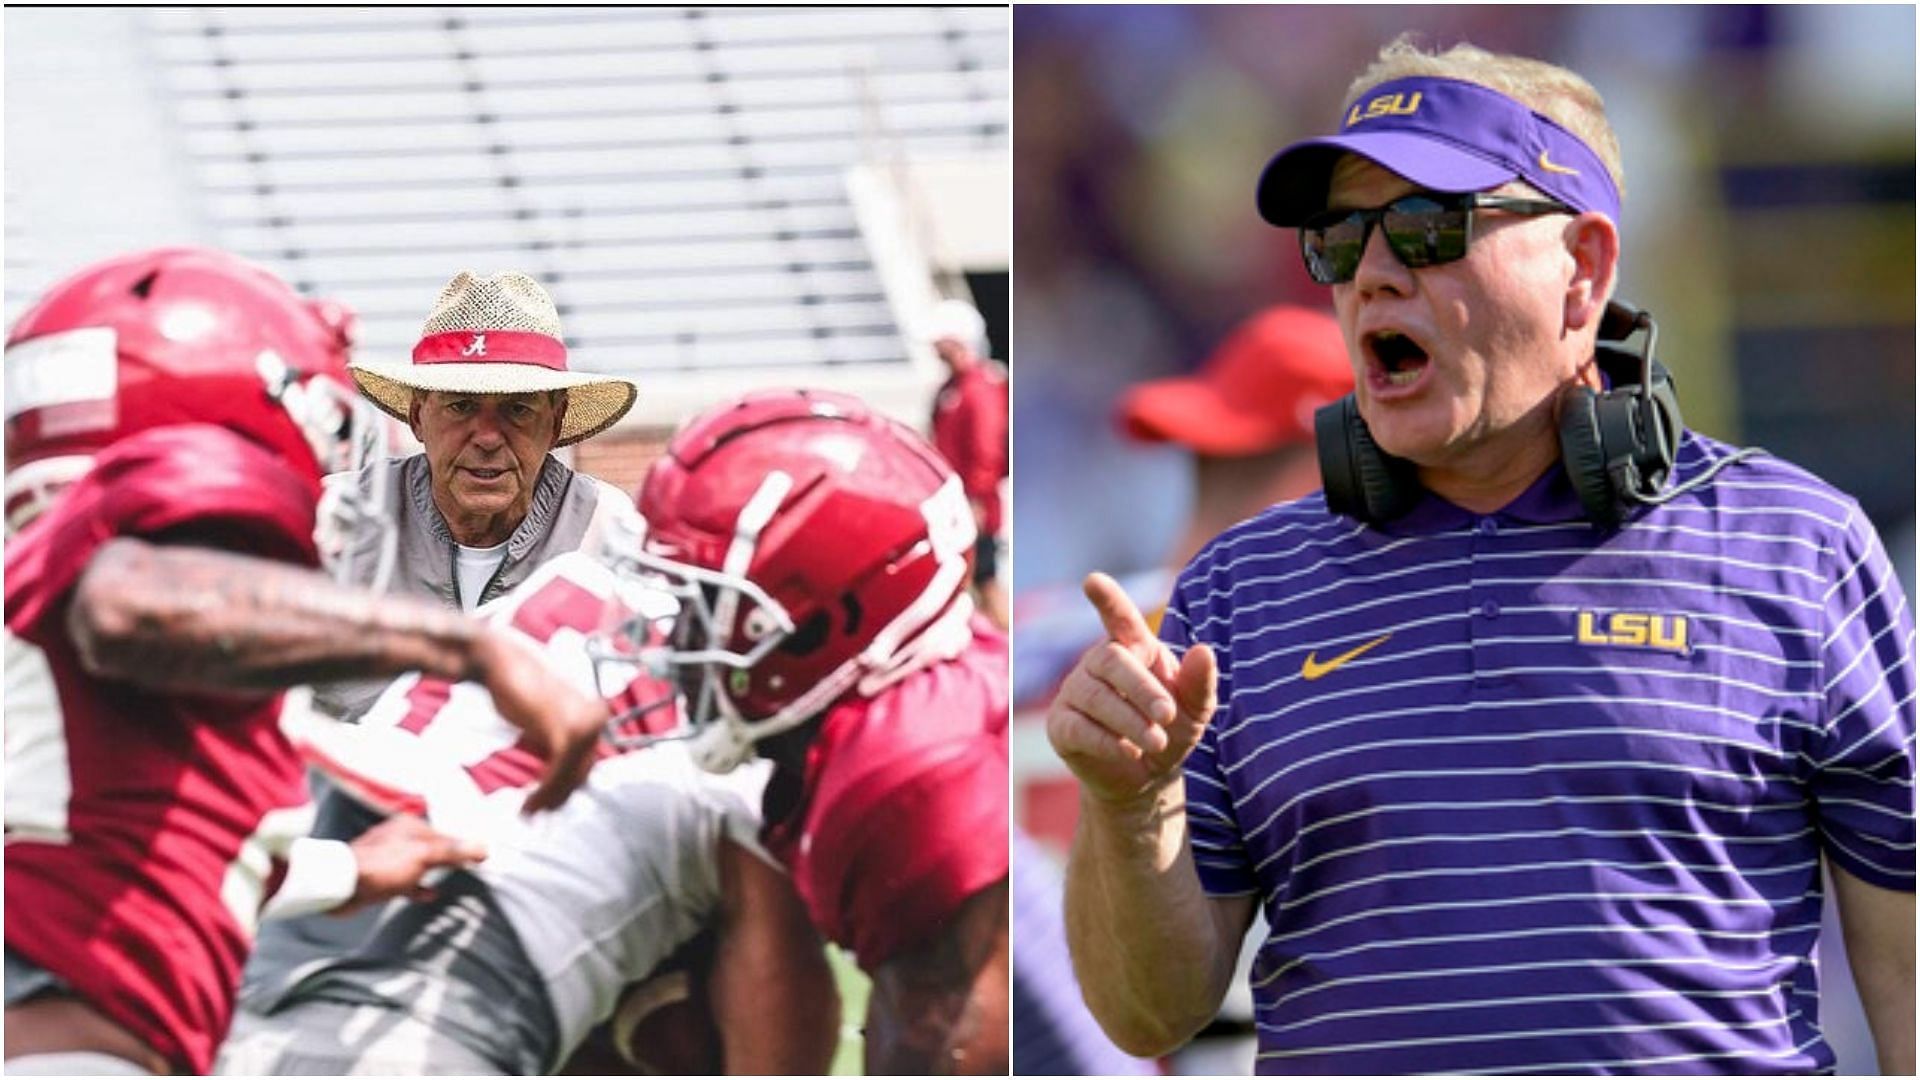 CFB analyst predicts that while Alabama may win against LSU, the latter will win the SEC West